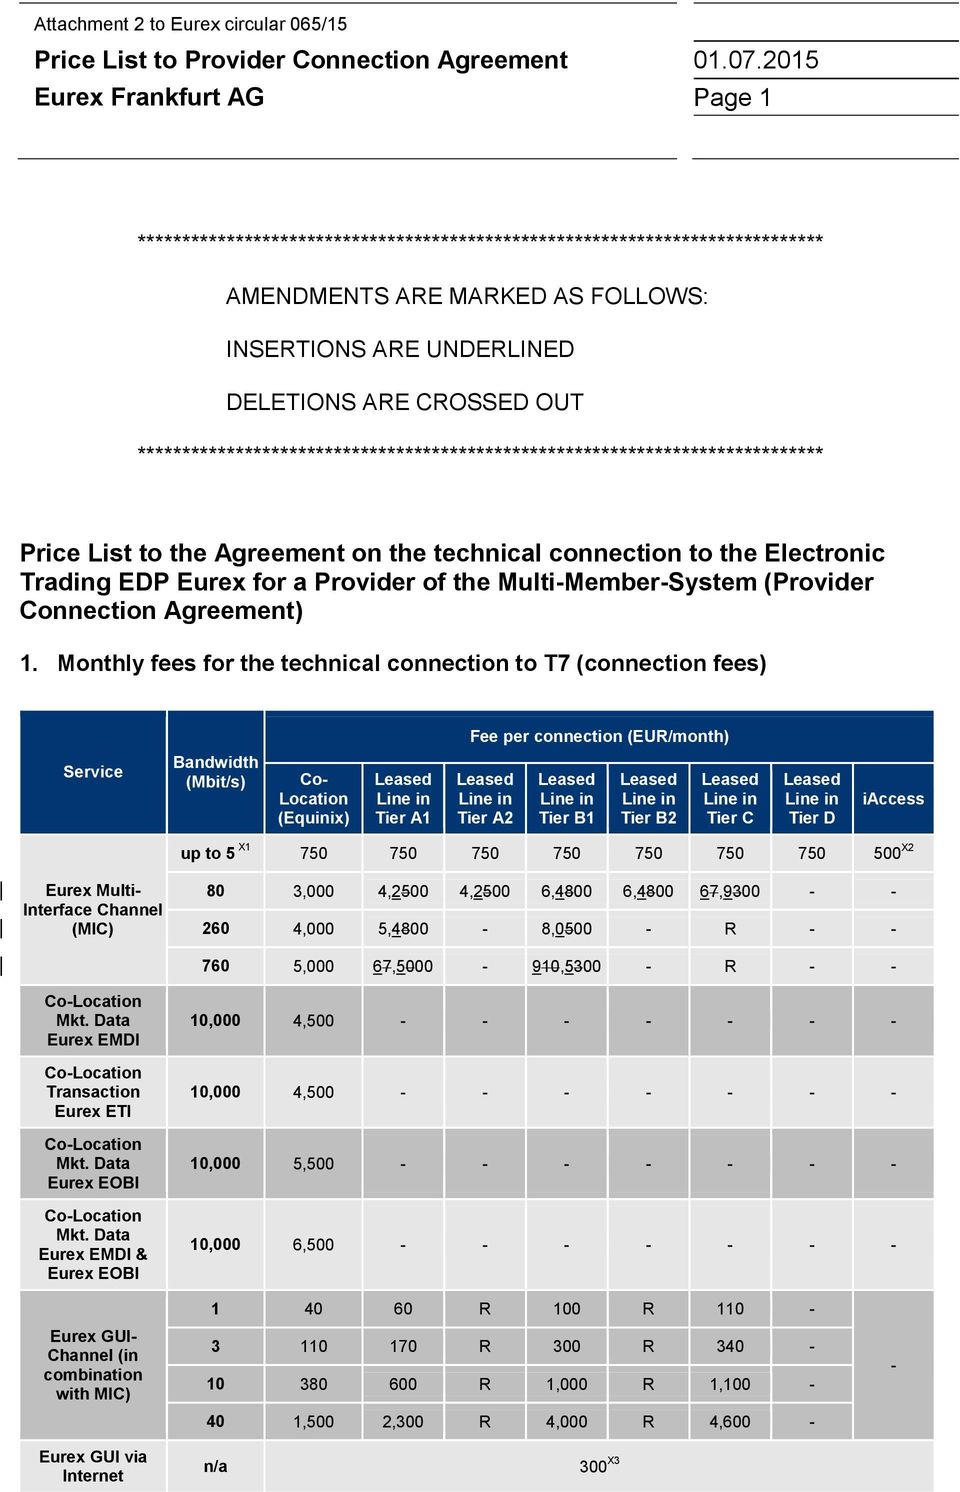 ***************************************************************************** Price List to the Agreement on the technical connection to the Electronic Trading EDP Eurex for a Provider of the